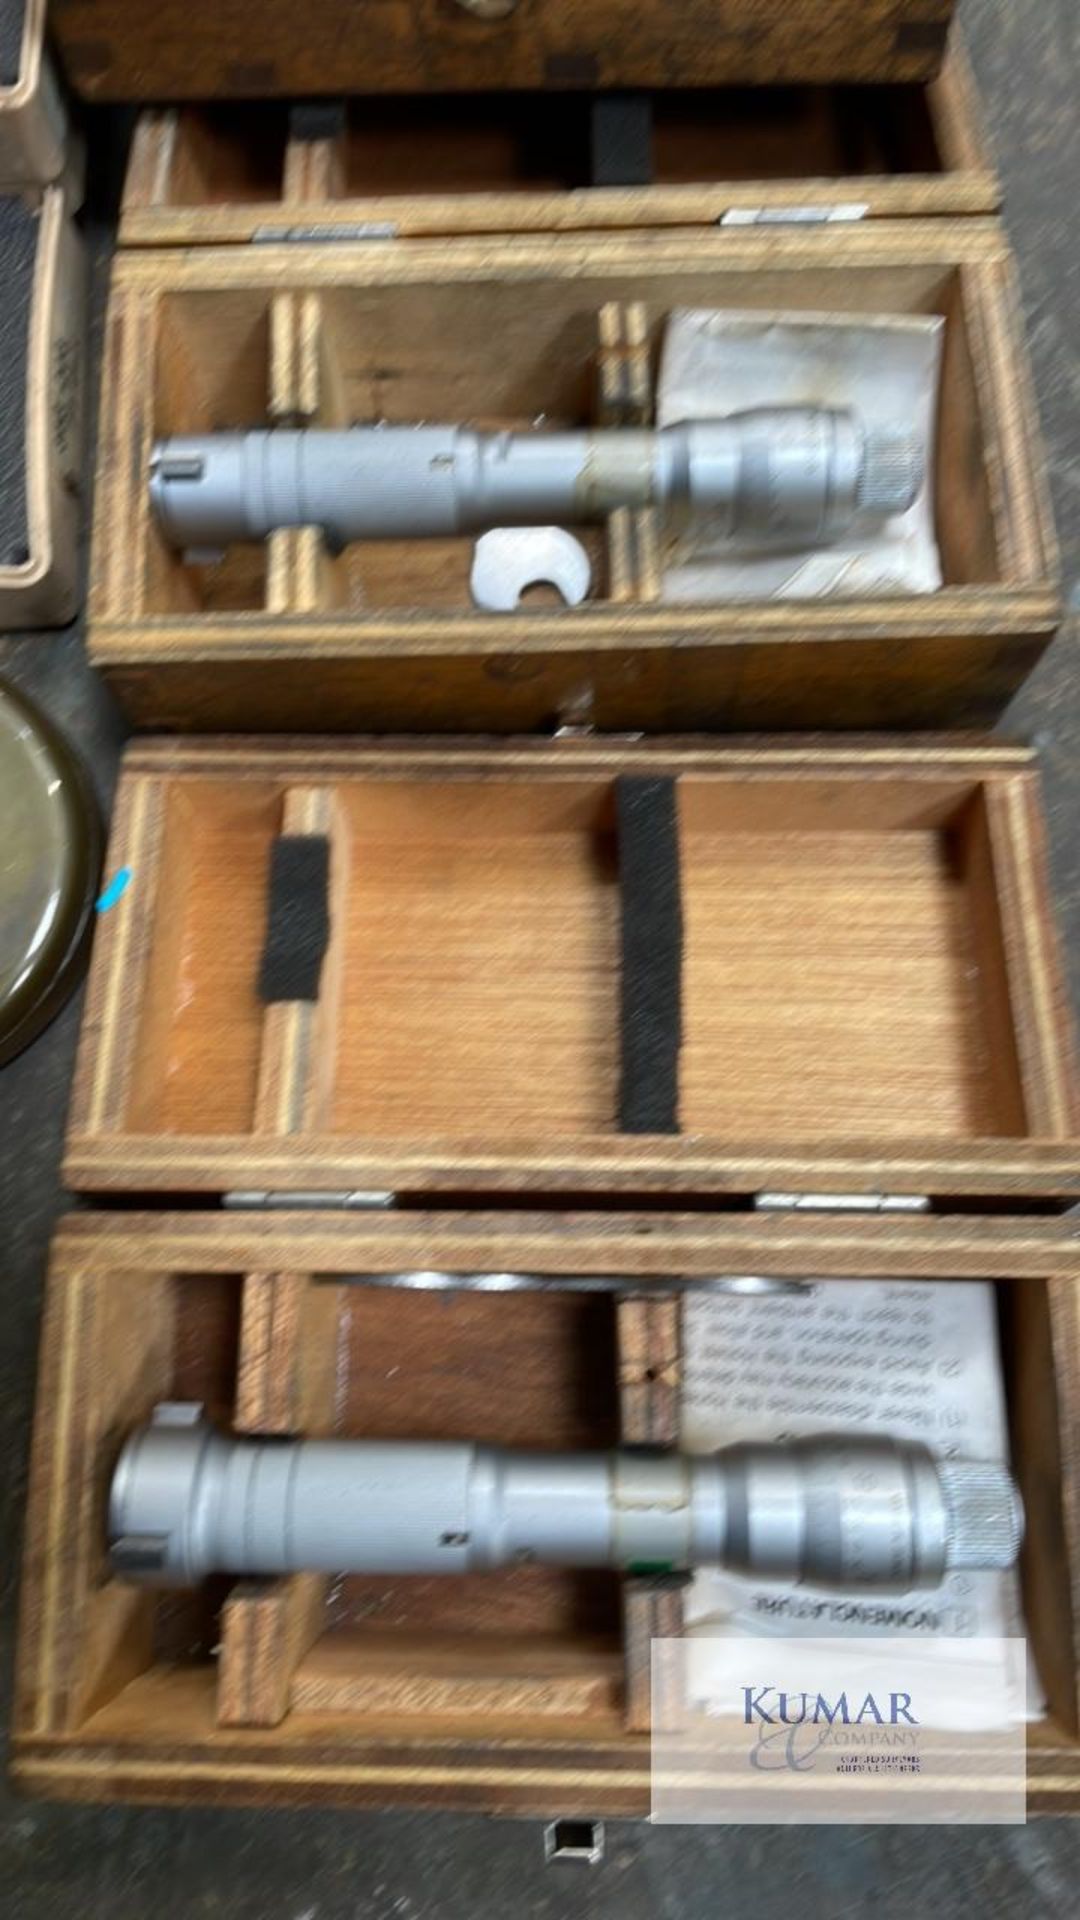 Various bore micrometers 10 in total ranging from 10 mm to 50mm Includes calibration rings - Image 2 of 7